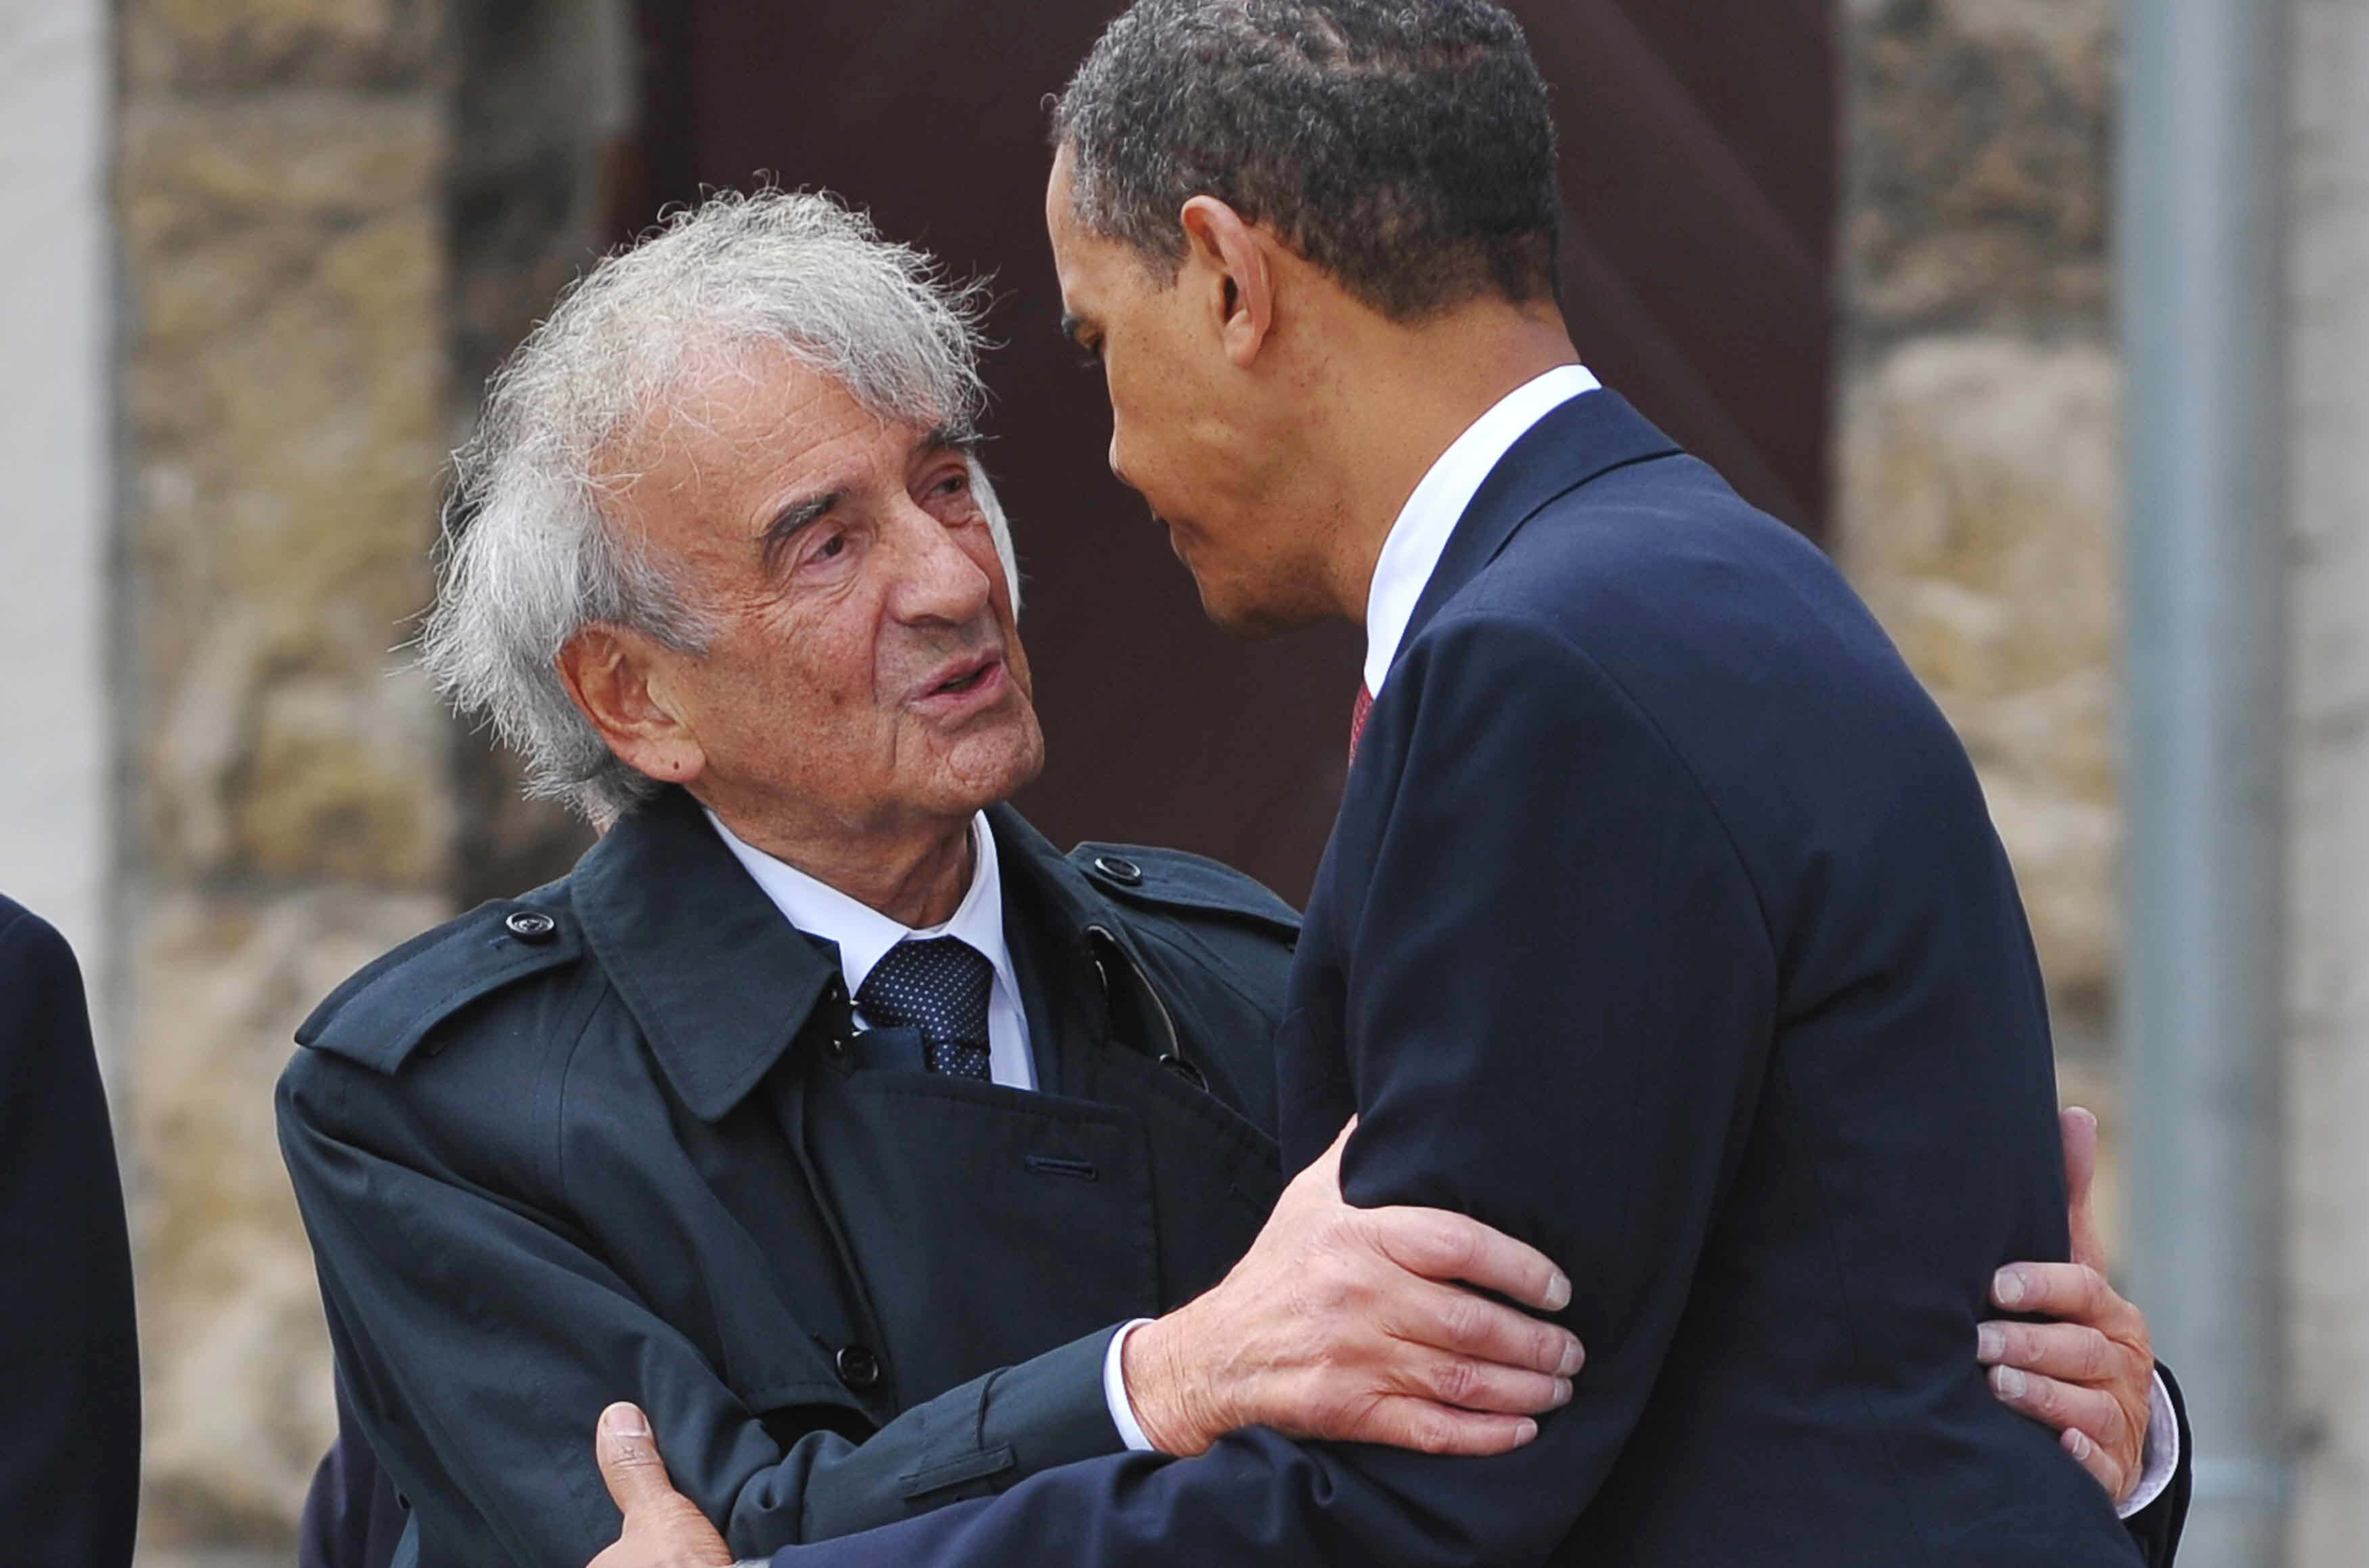 This 2009 file photo shows US President Barack Obama embracing former Nazi concentration camp inmate Elie Wiesel.